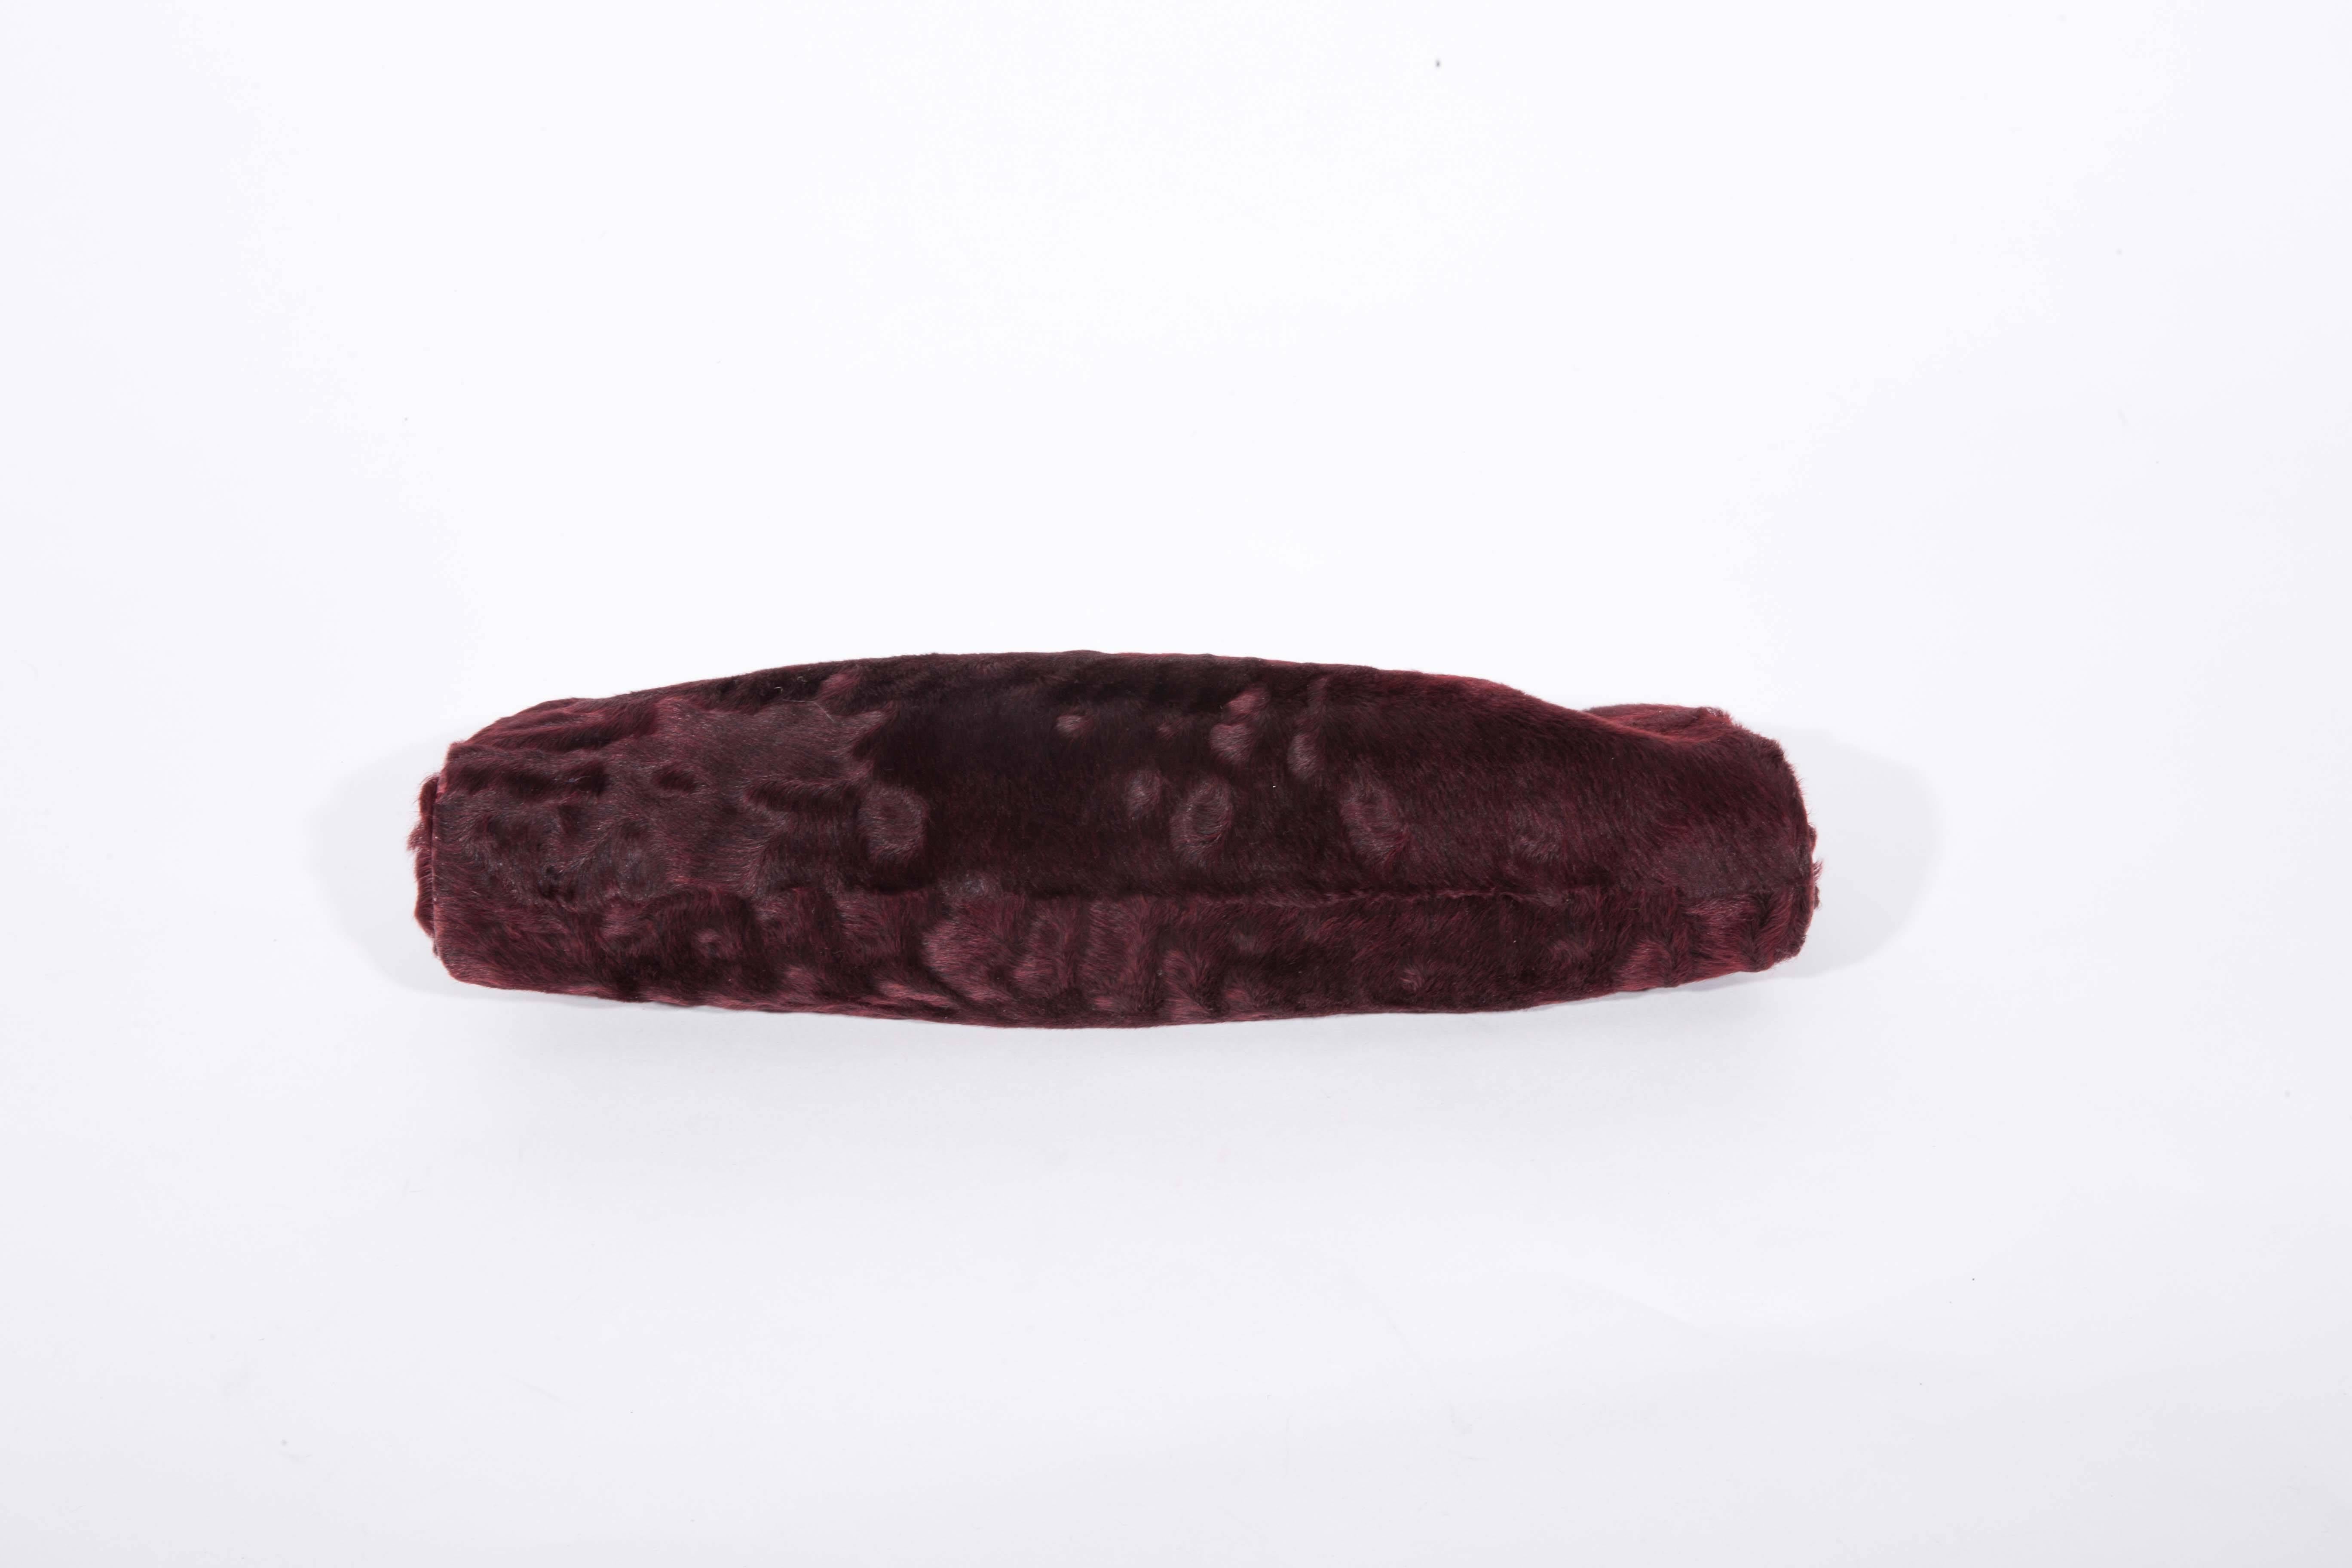 Gorgeous Dennis Basso genuine fur clutch with gold chain shoulder strap. This clutch is trimmed in wine colored snakeskin and closes with a large faceted crystal. Interior and Exterior of this bag are in excellent condition. Bag measures 12 inches